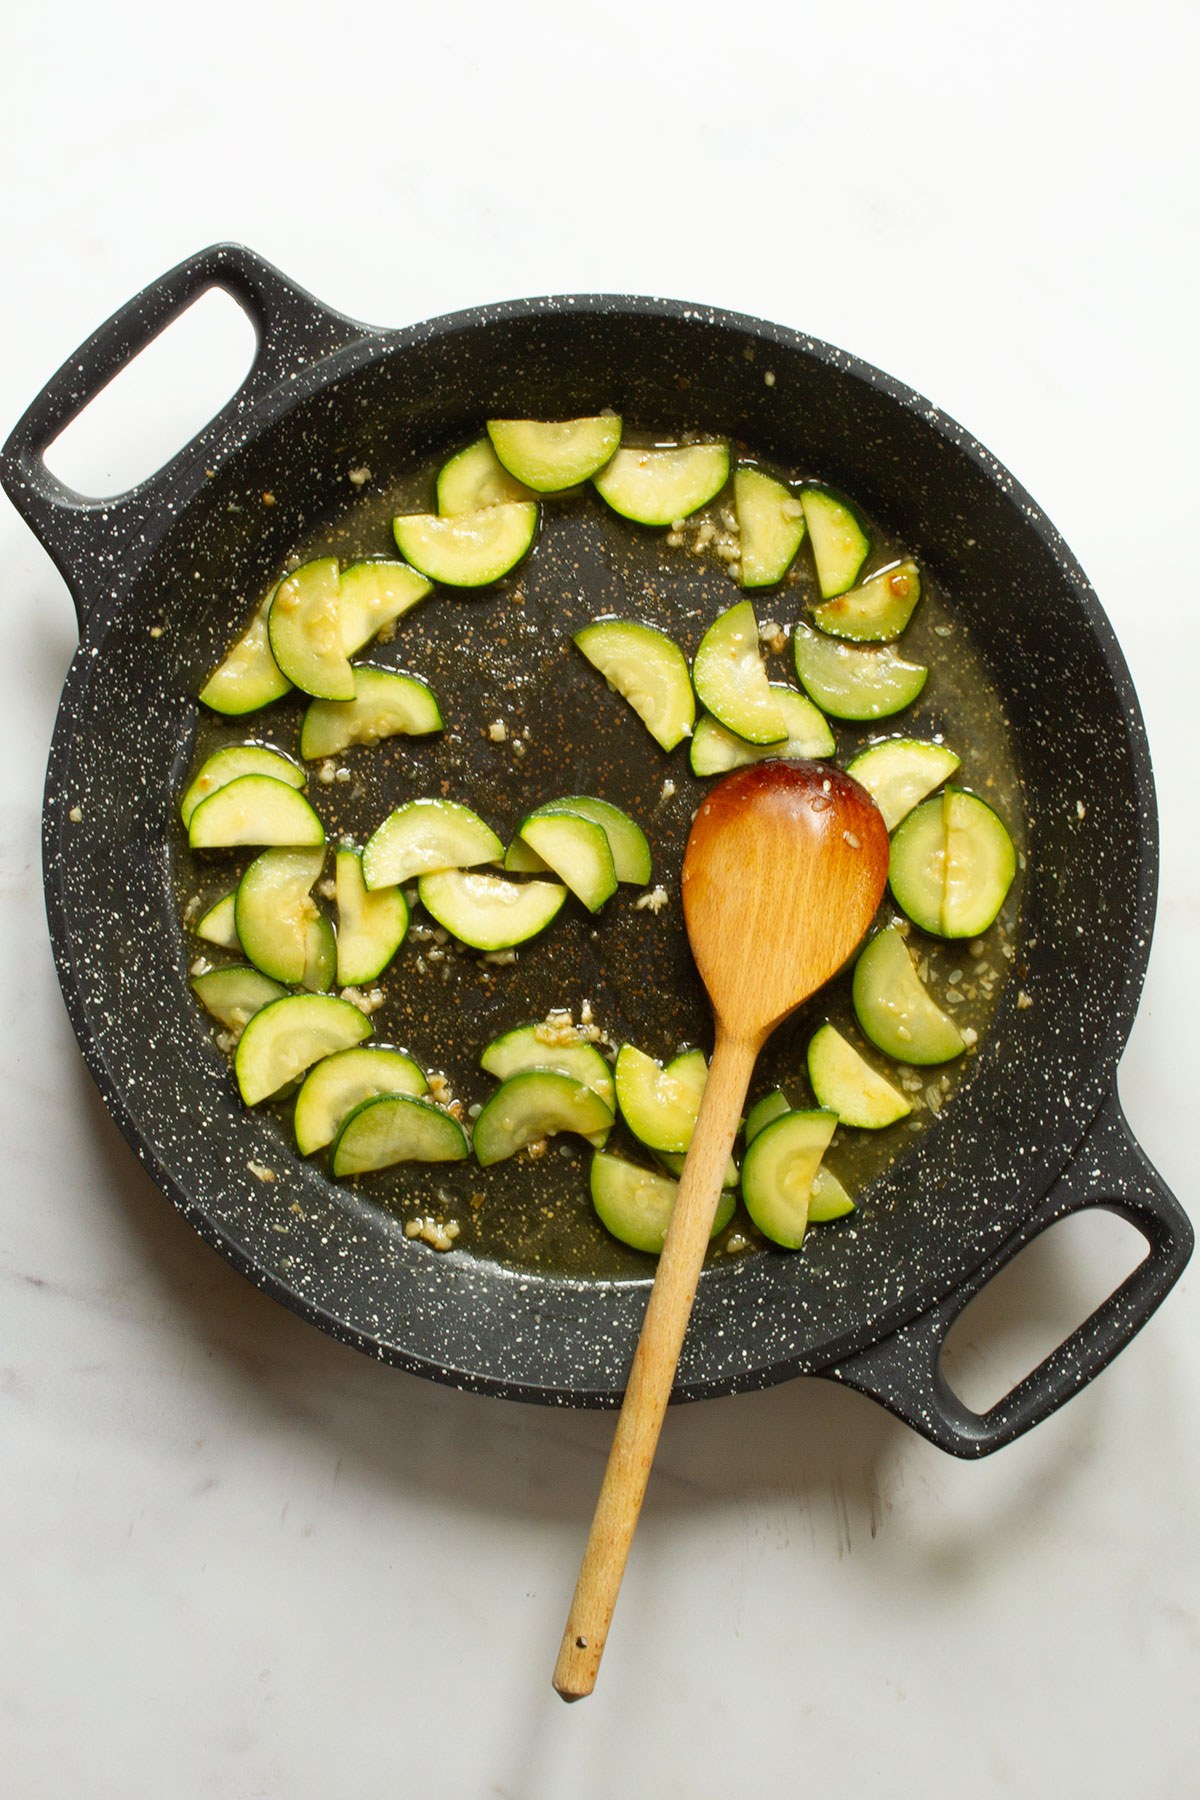 Frying the zucchini/courgette until it starts to brown in a dark coloured pan.